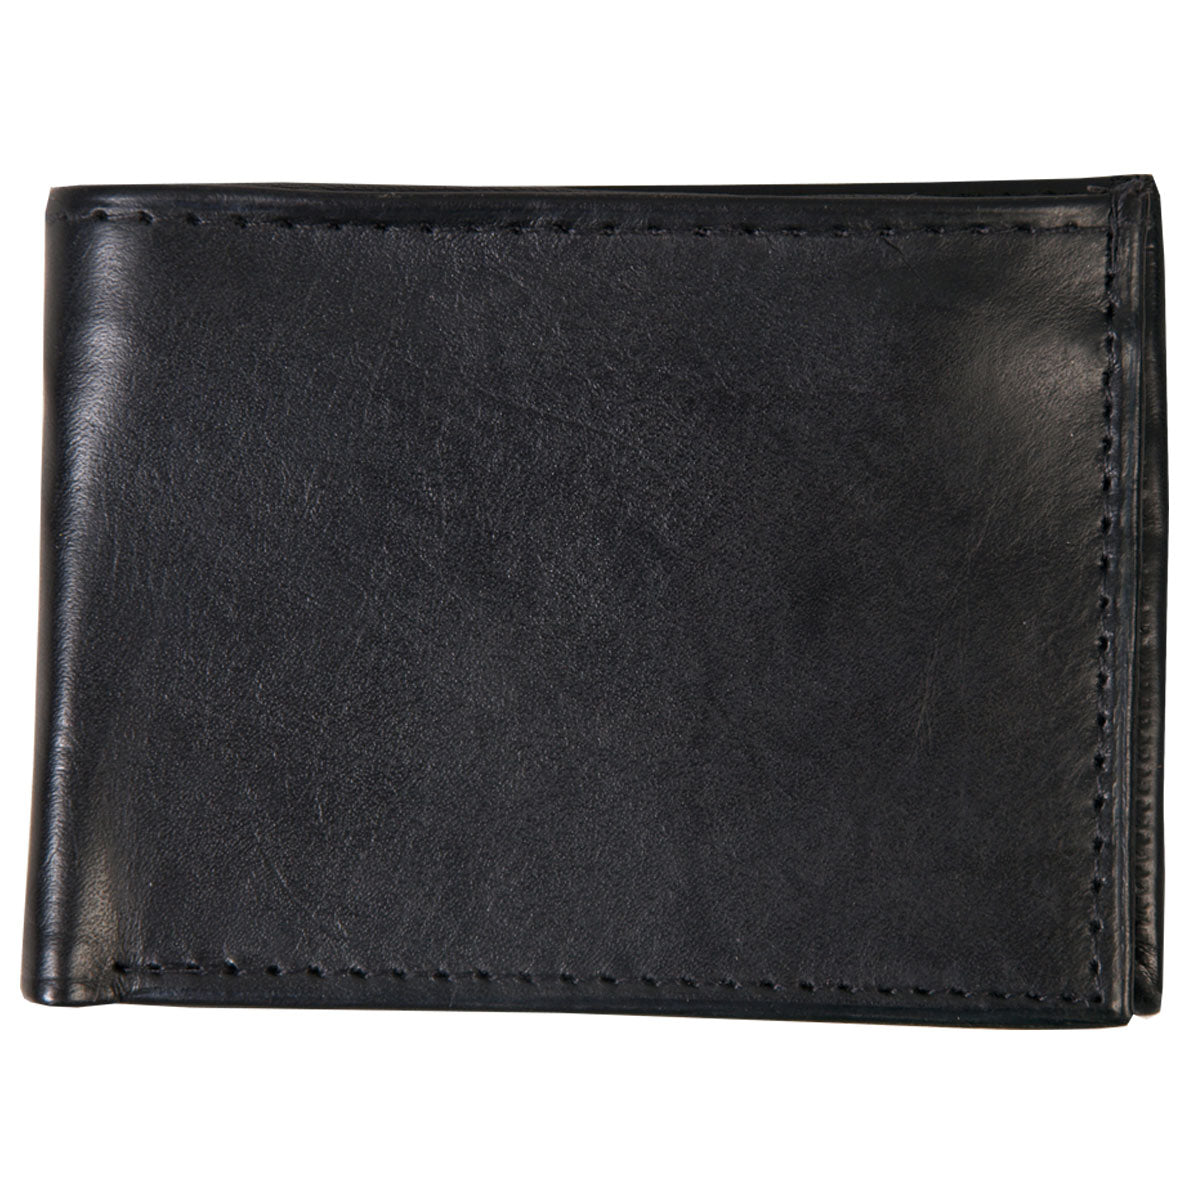 Hot Leathers WLD1003 Black Leather Bi-Fold Wallet with Picture Flap